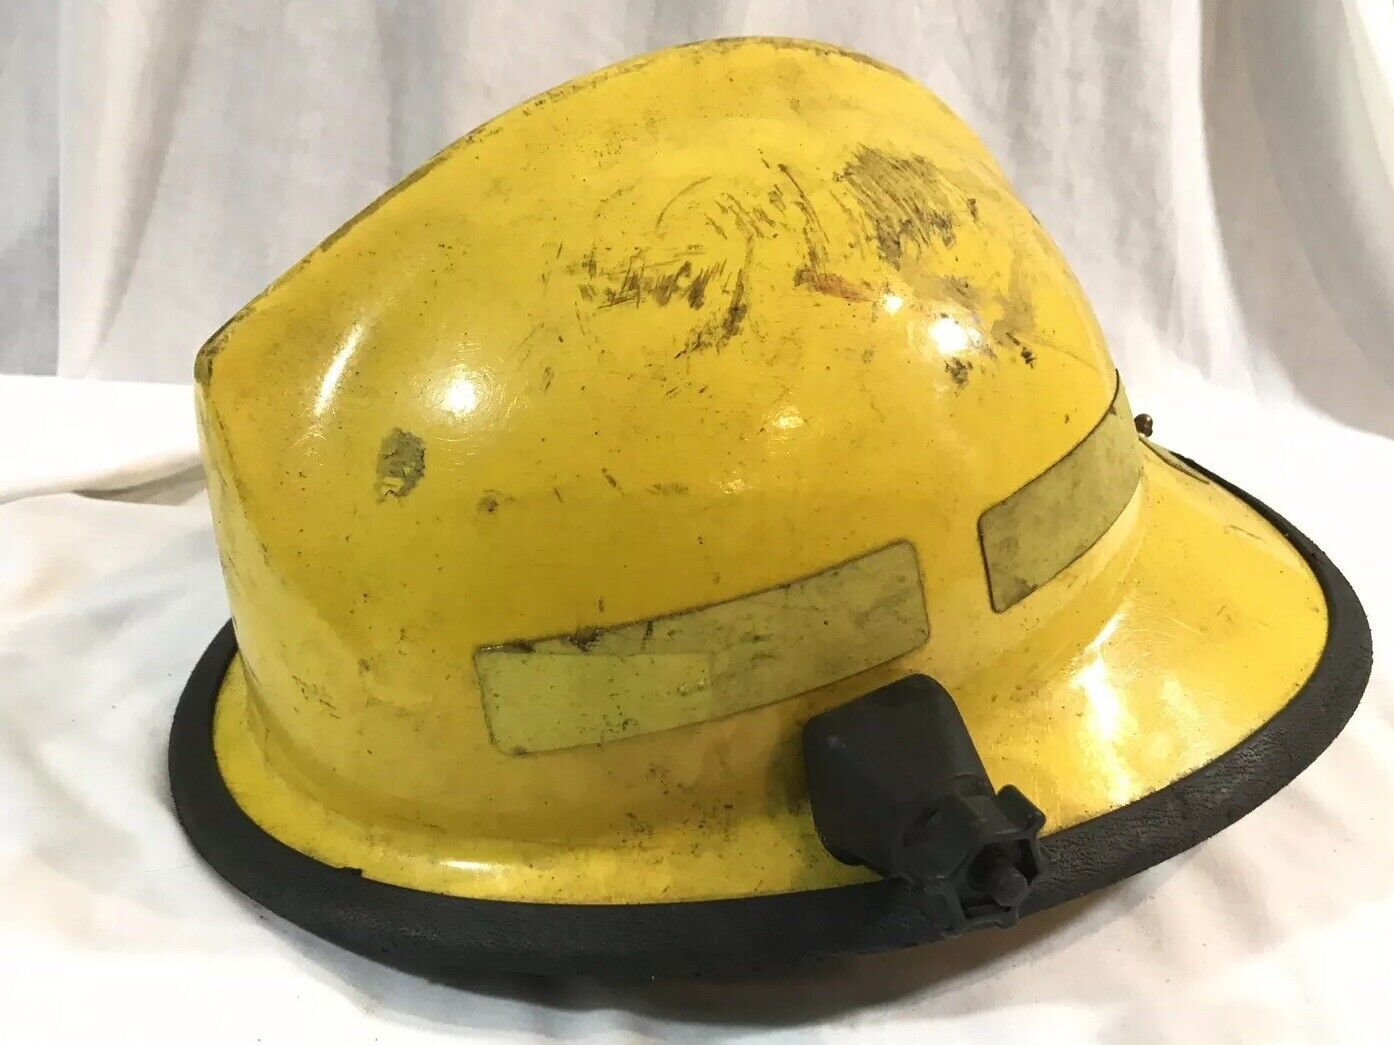 2006 Authentic Paul Conway Lion Apparel Firefighting Yellow Helmet Made In US